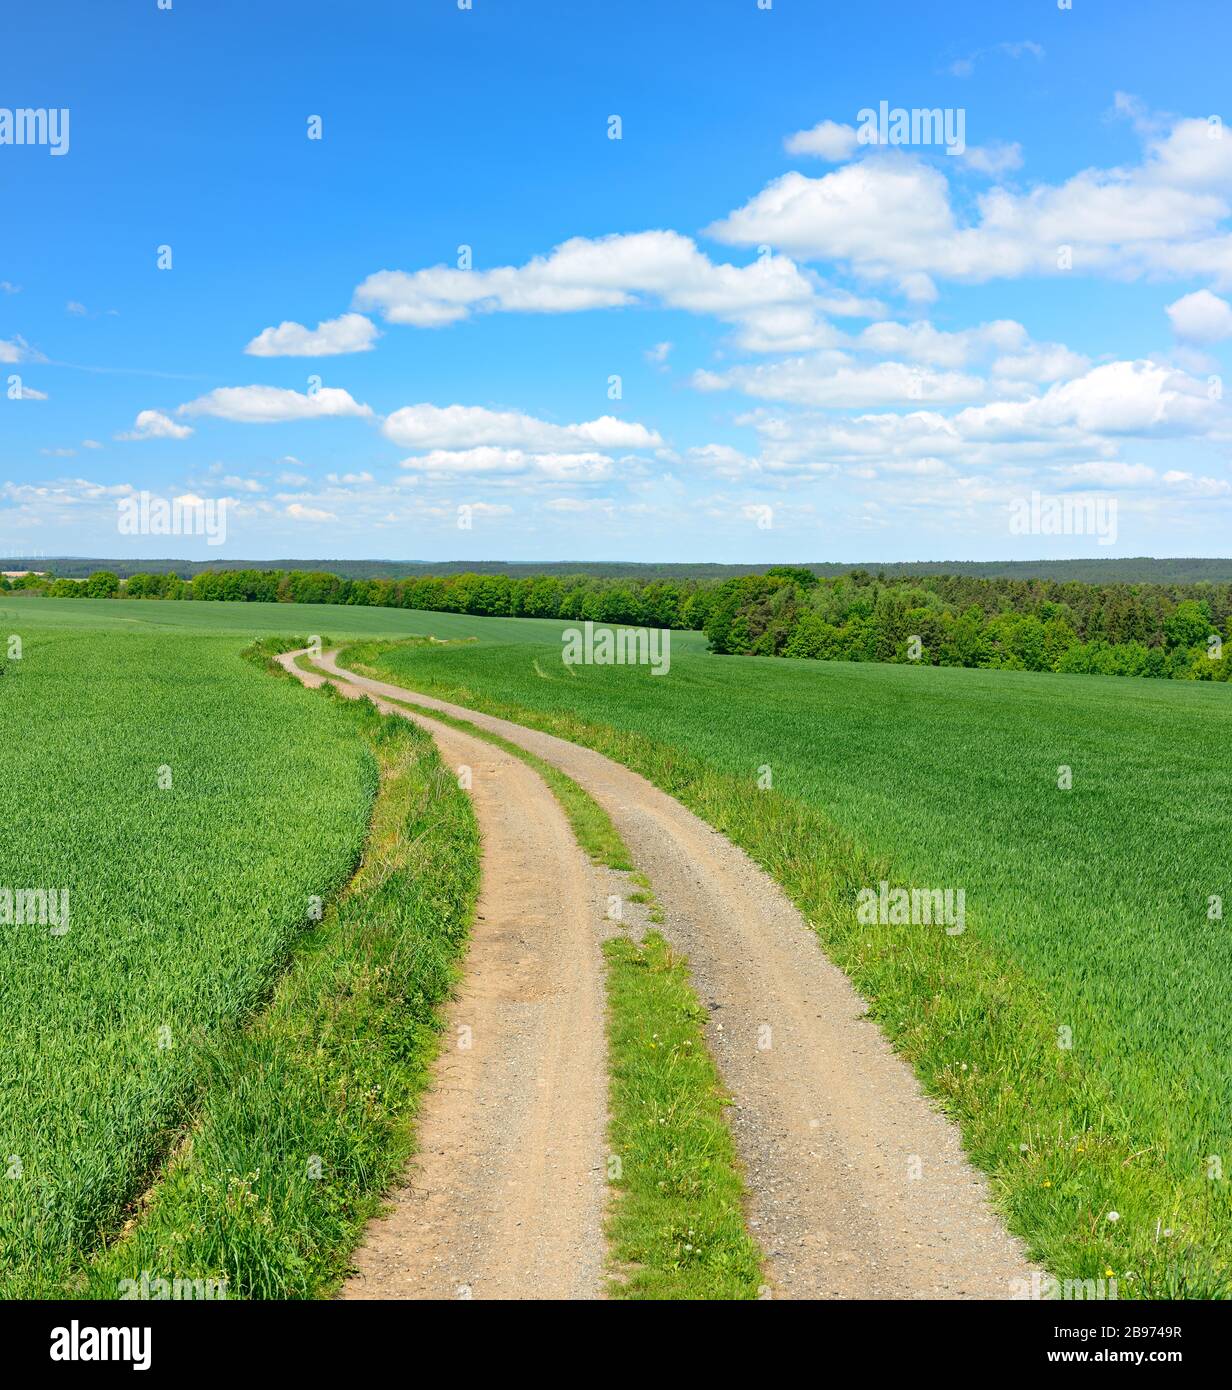 Country lane through cultural landscape in spring, green grain fields, blue sky with cumulus clouds, near Hermsdorf, Saale-Holzland-Kreis, Thuringia Stock Photo